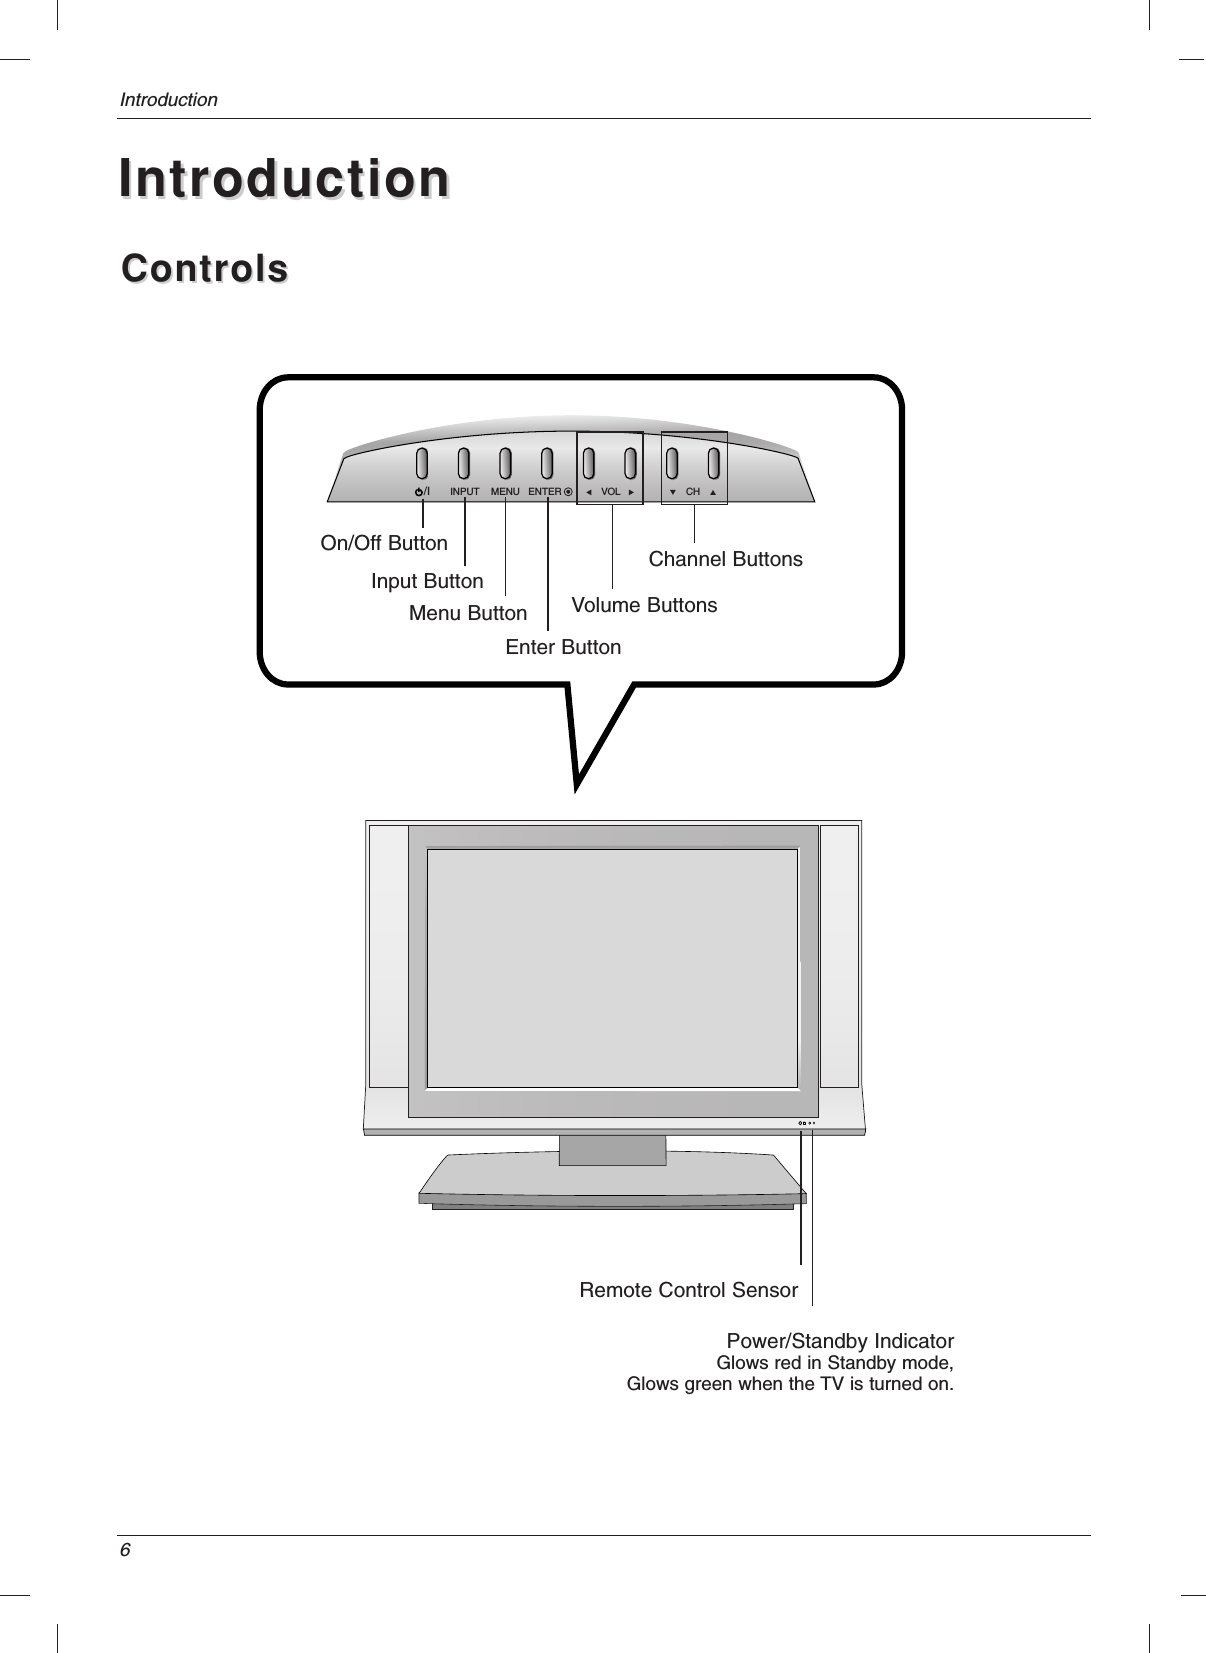 6IntroductionIntroductionIntroductionControlsControlsRINPUT MENU VOL CH/I ENTERPower/Standby IndicatorGlows red in Standby mode,Glows green when the TV is turned on.Channel ButtonsVolume ButtonsEnter ButtonMenu ButtonOn/Off ButtonInput ButtonRemote Control Sensor